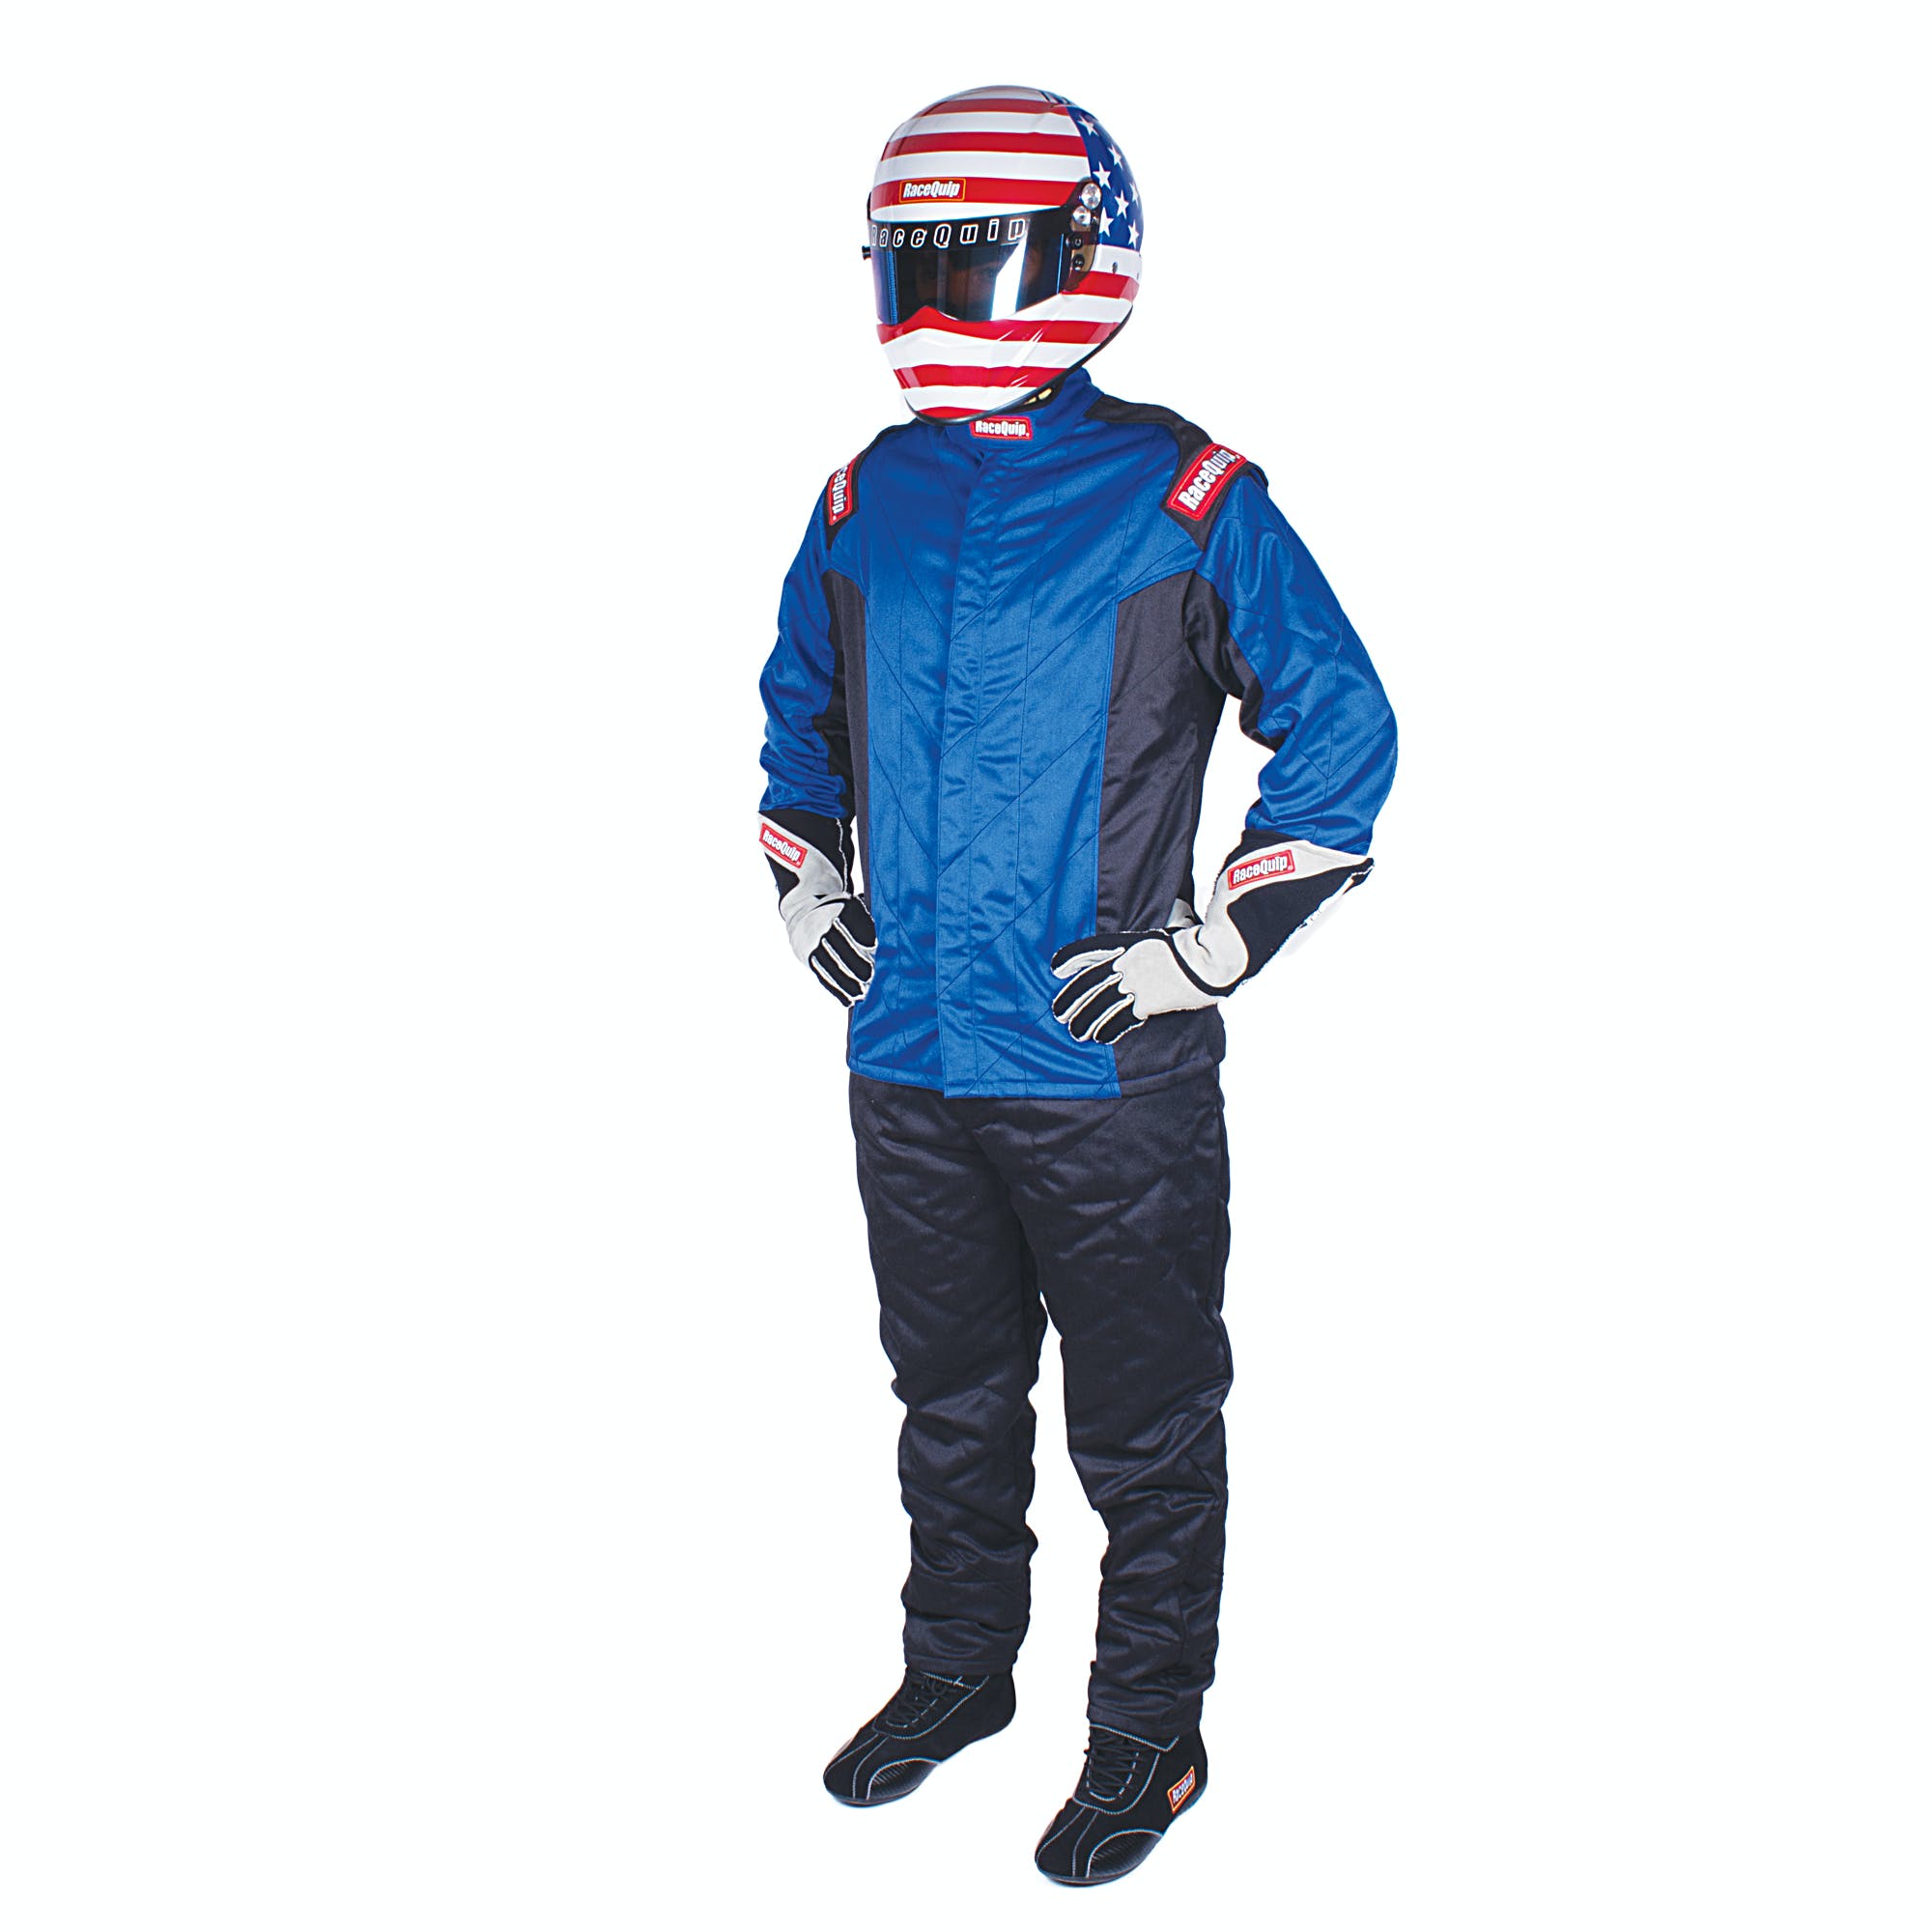 RaceQuip 91619229 Nomex Multi Layer Racing Driver Fire Suit Jacket; SFI 3.2A/ 5 ; Blue Small